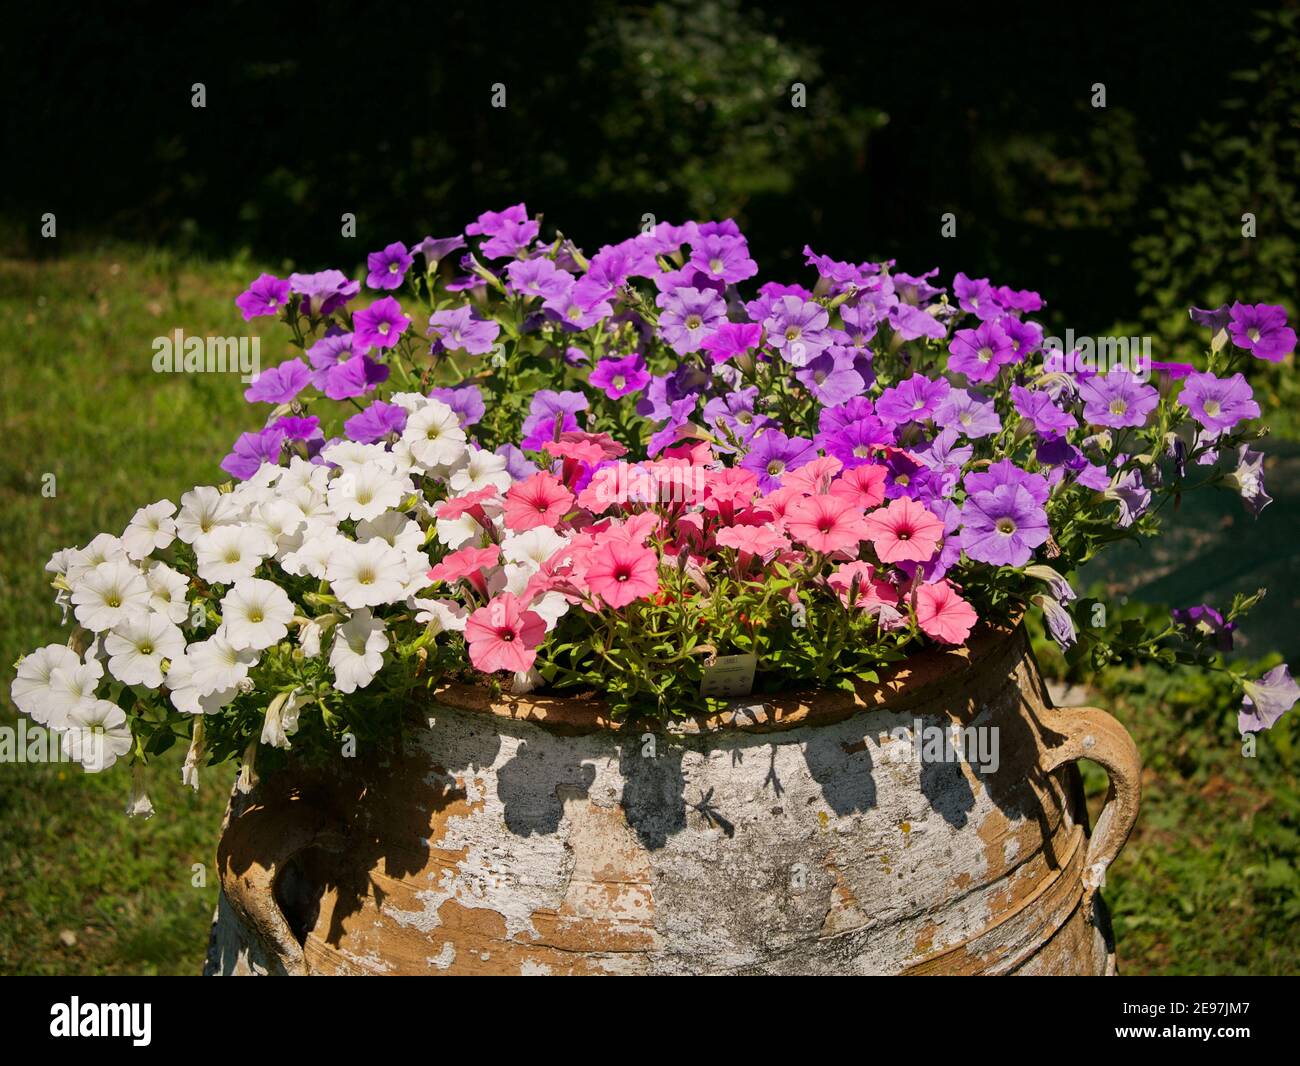 Clay jug, very old, filled with beautiful flowers. Stock Photo